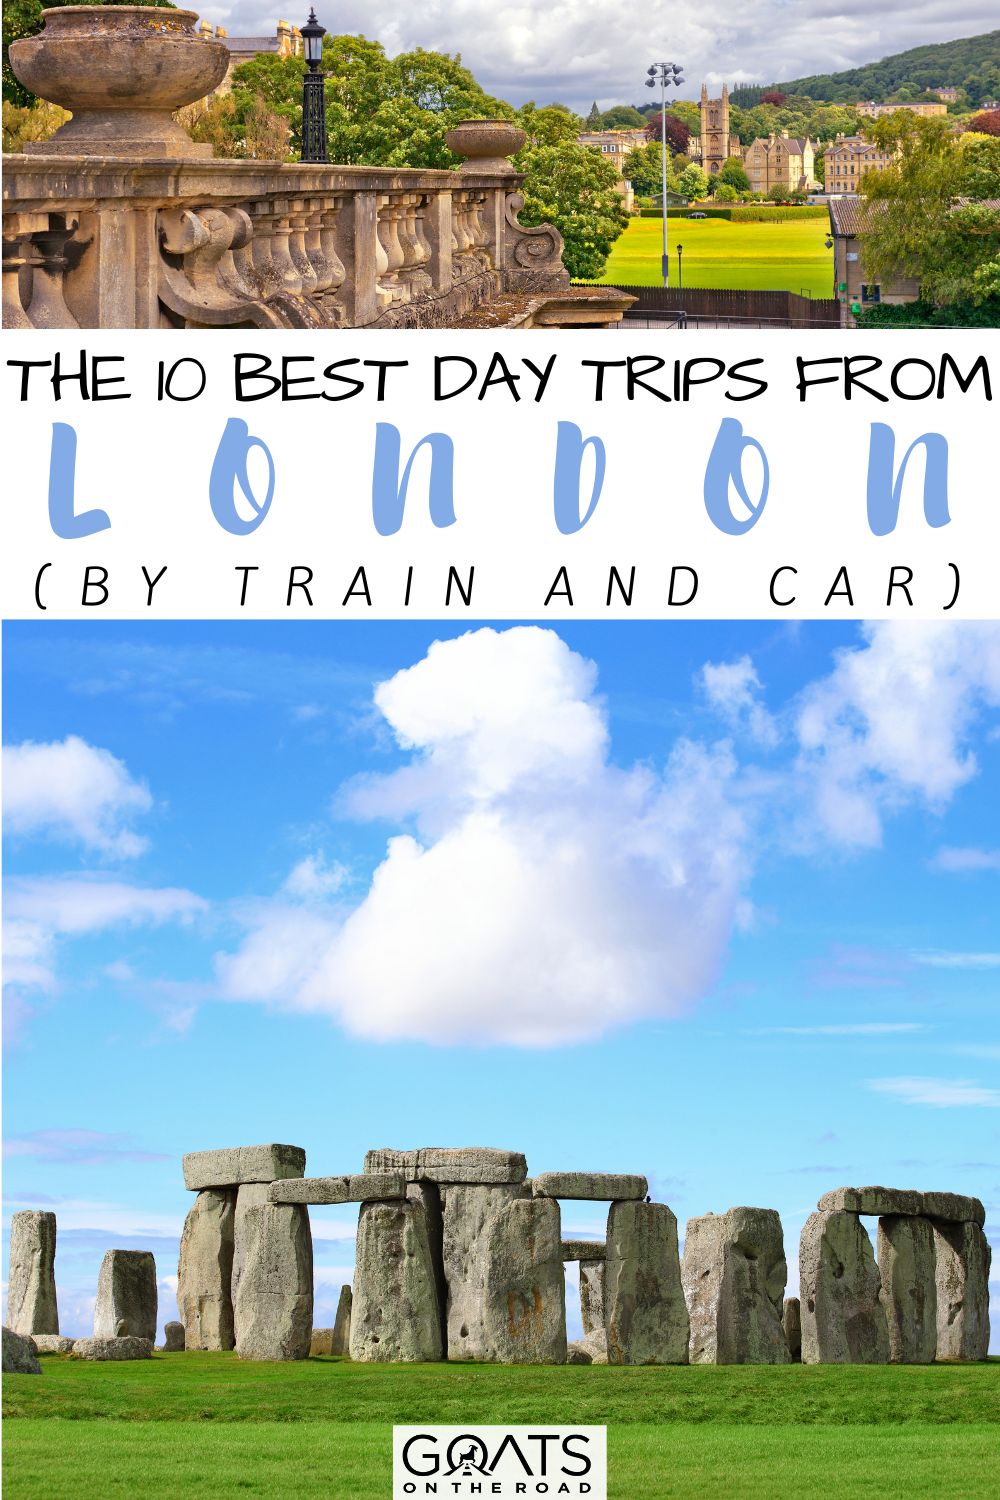 “The 10 Best Day Trips from London (by Train and Car)